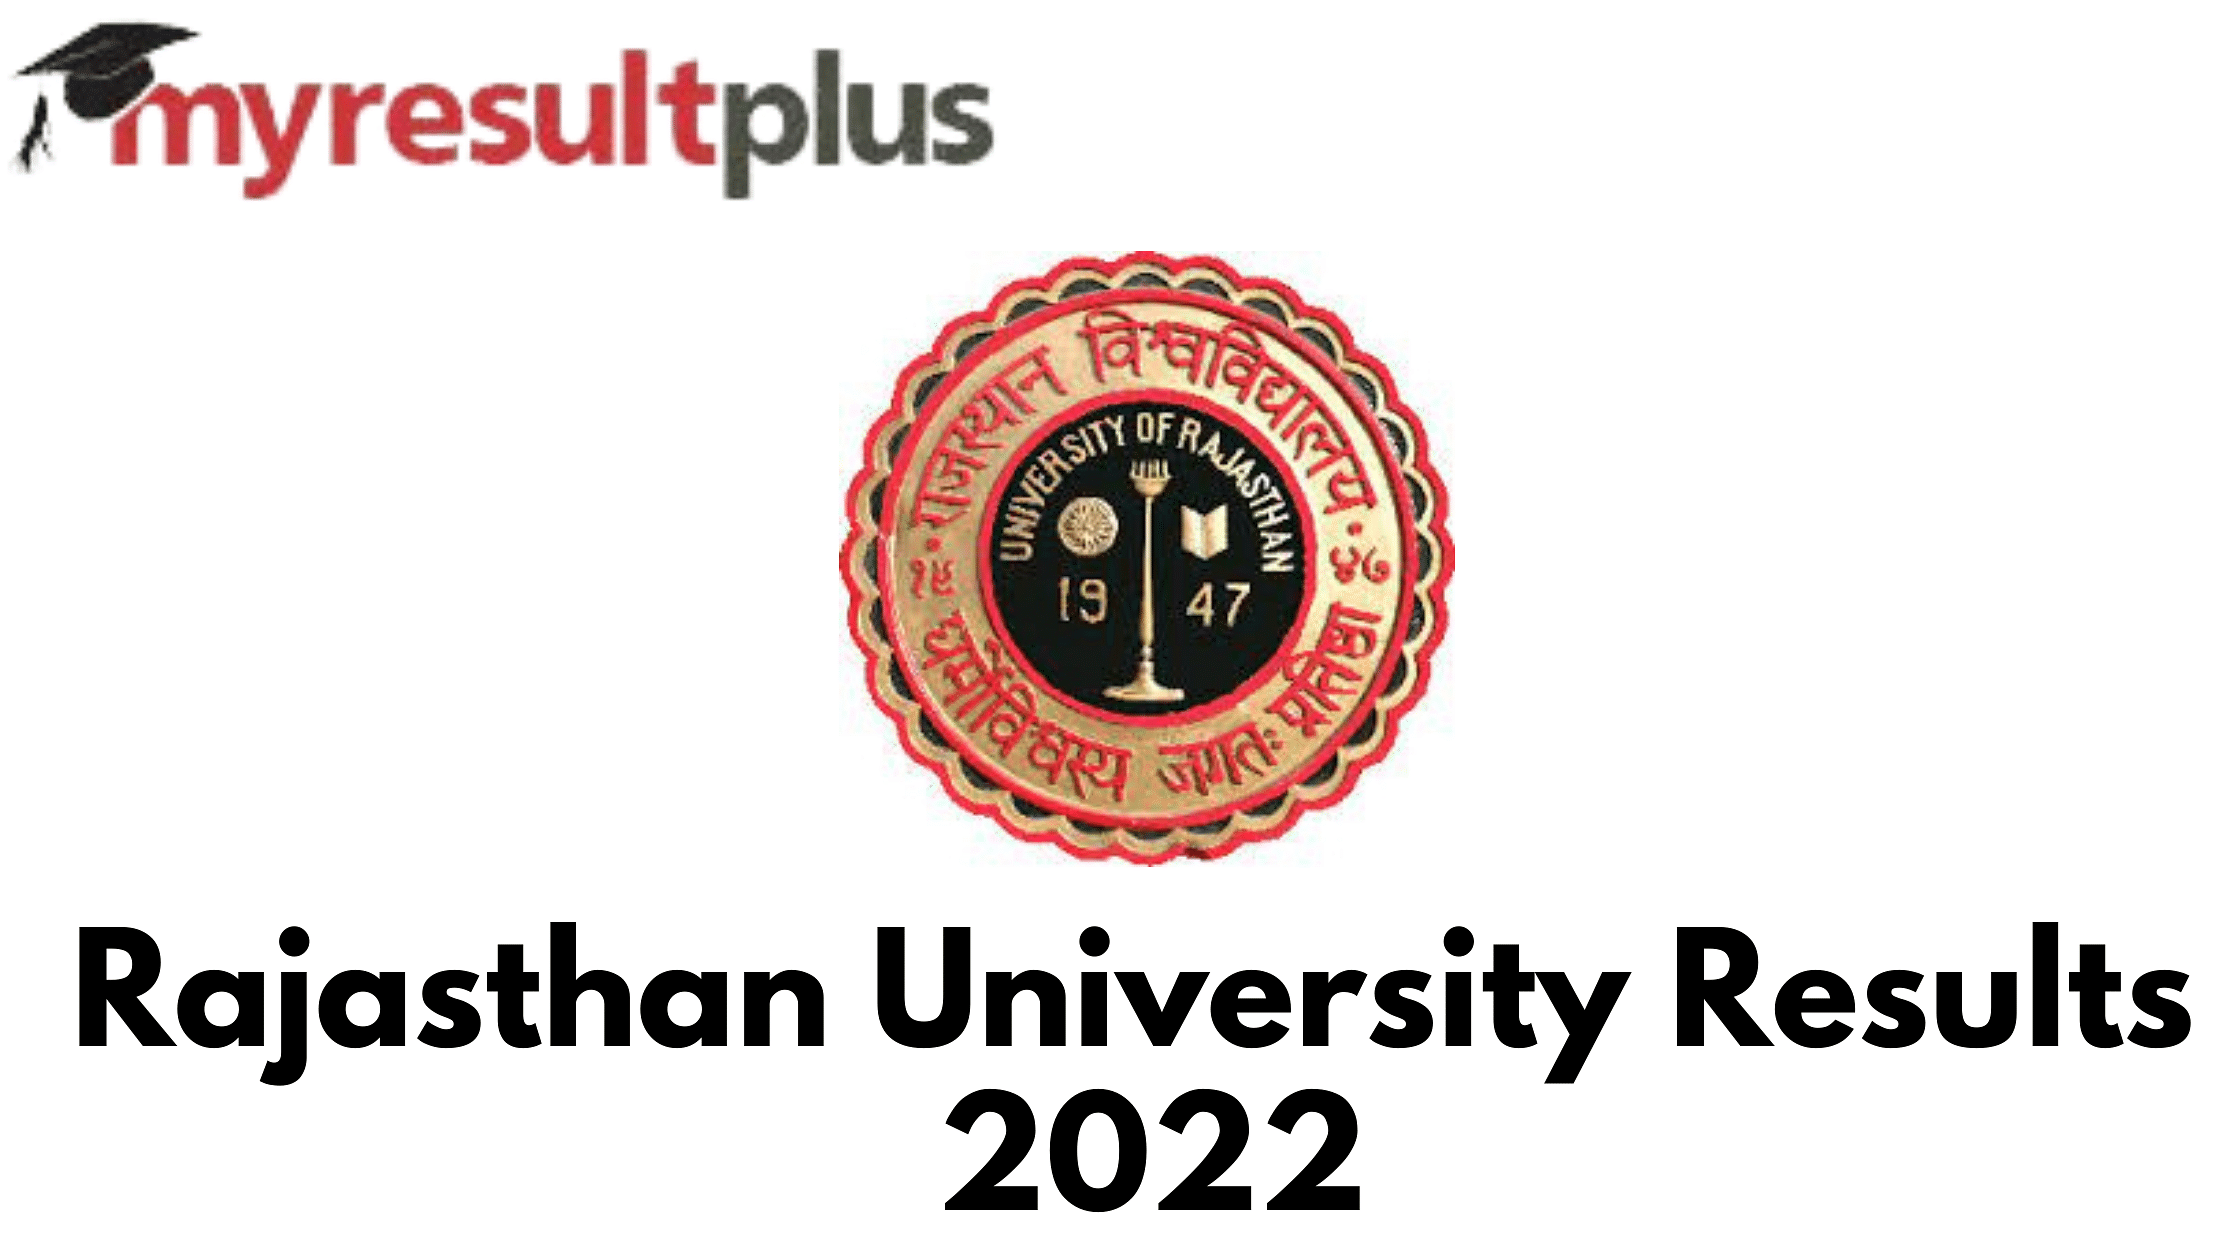 Rajasthan University Result 2022 Announced For BA 1st Year Exams, Know How to Check Here